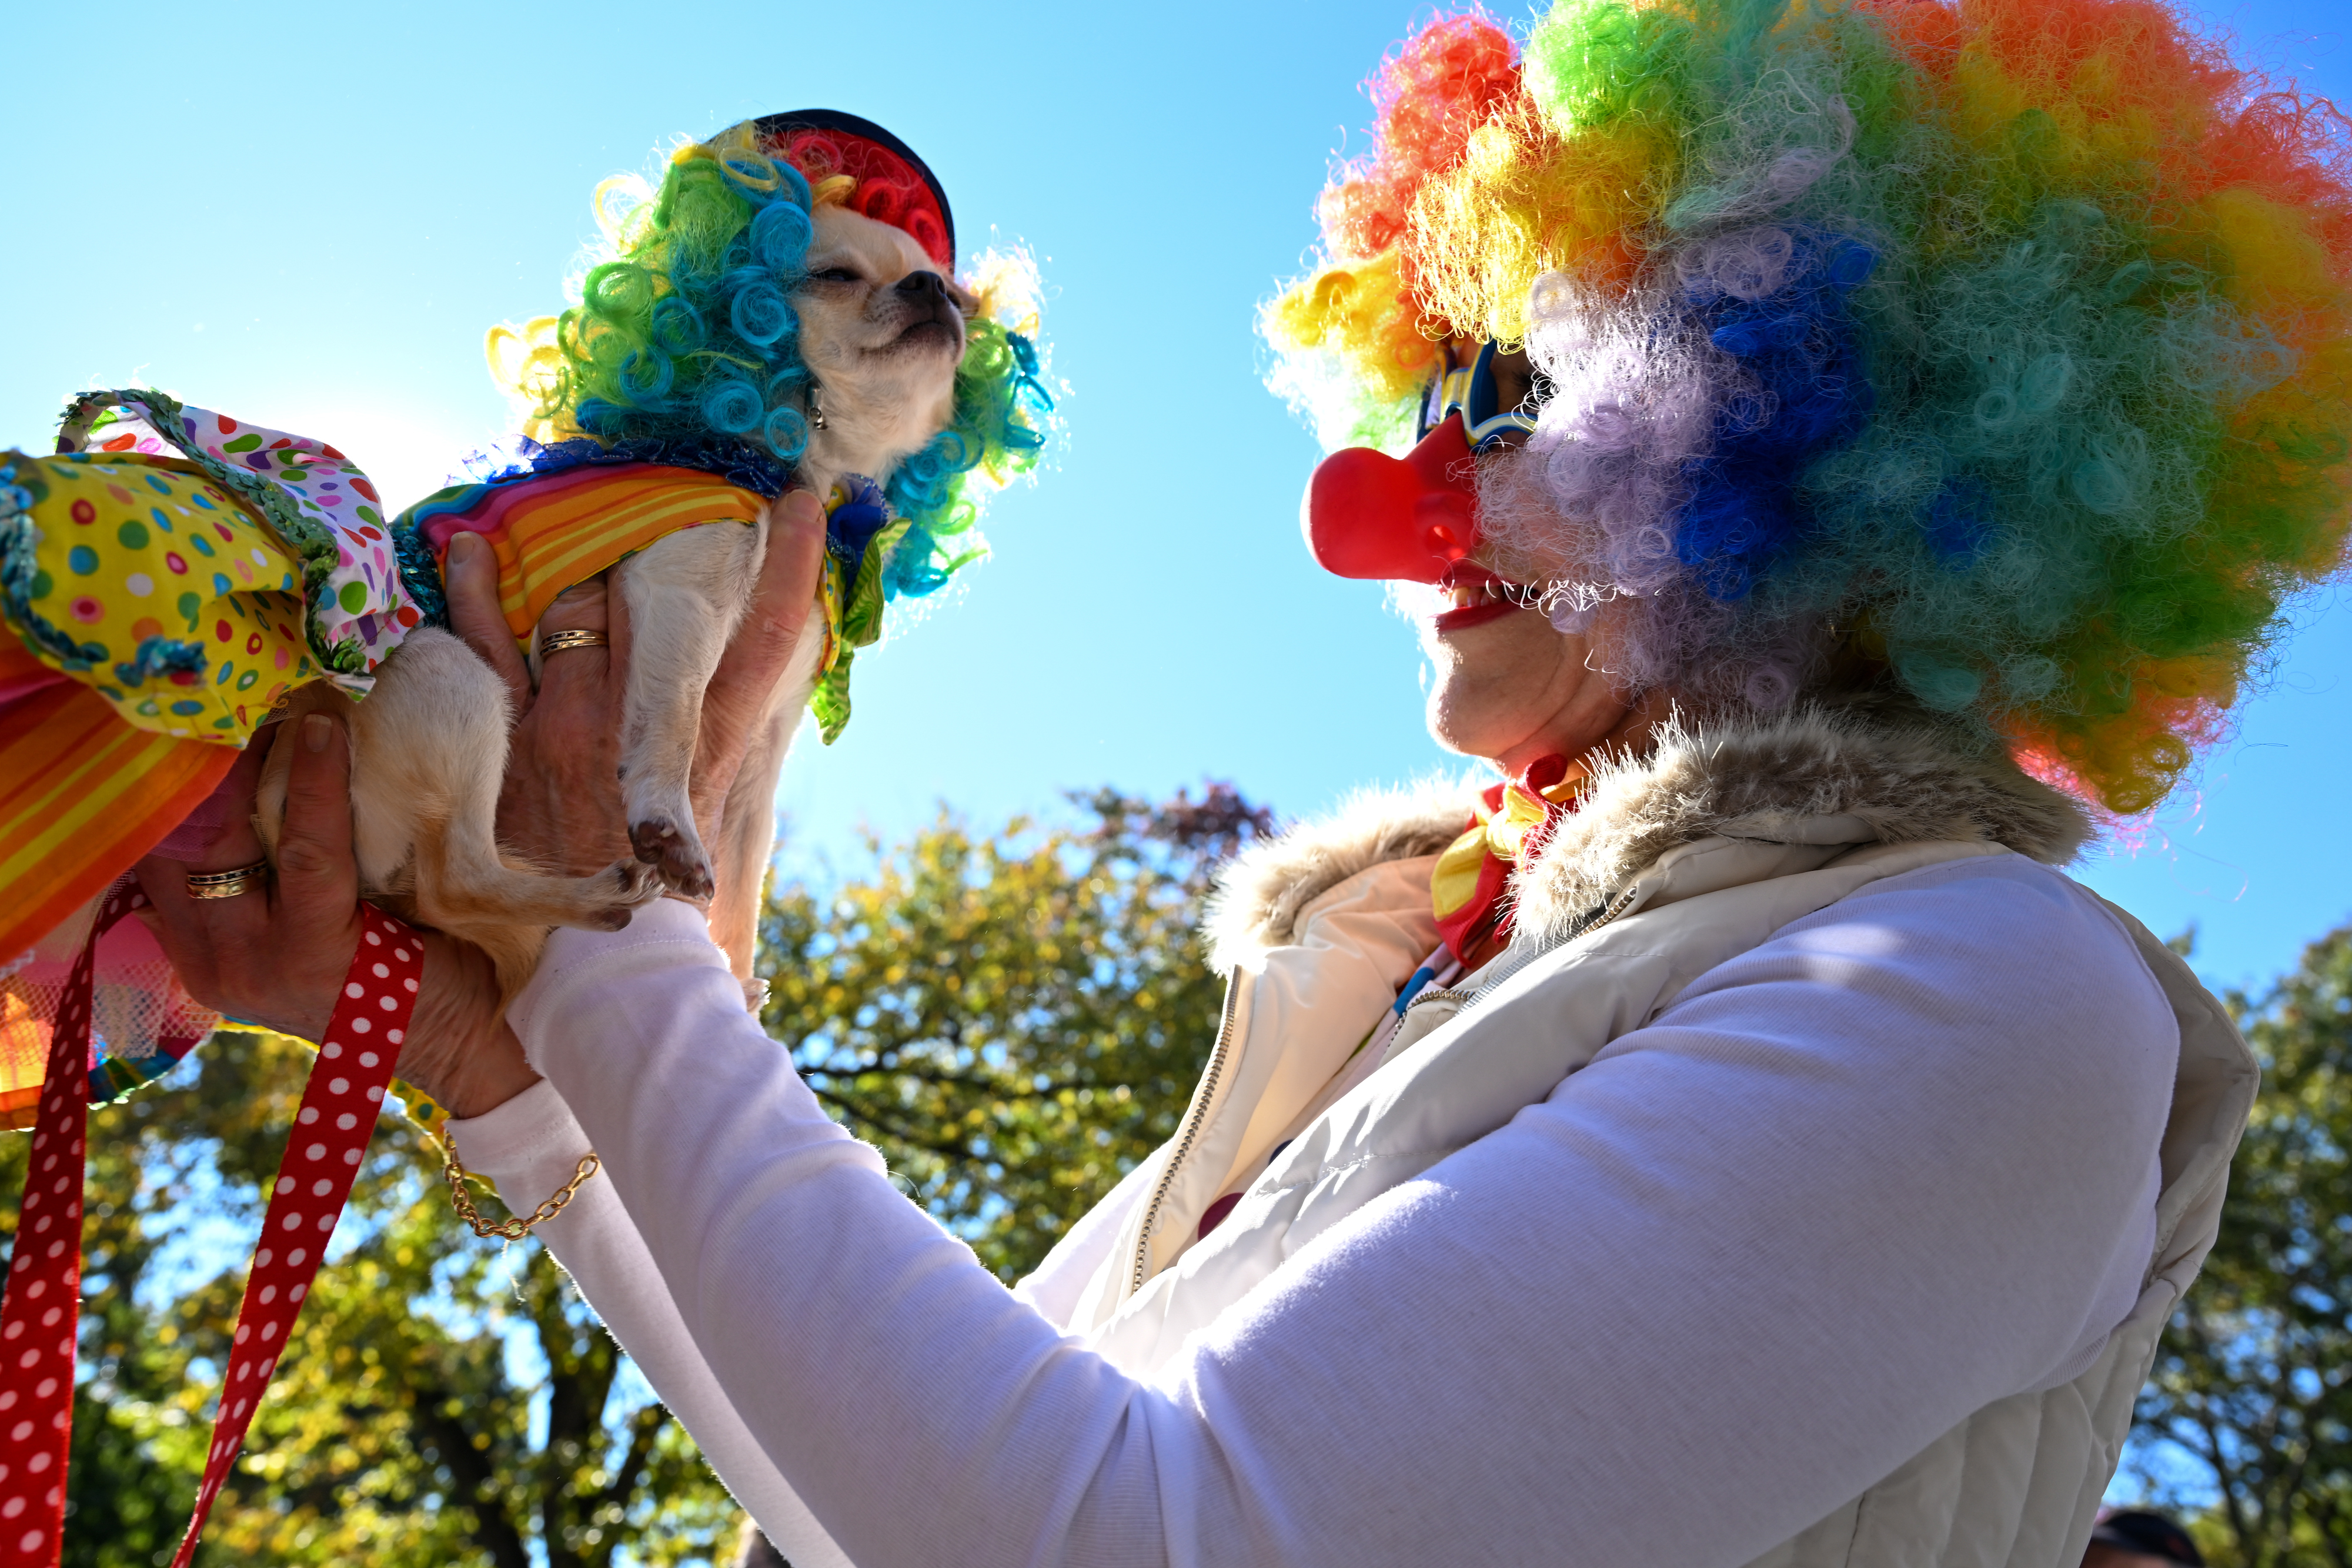 Cleo The Clown Chihuahua and her owner participate in the Annual Tompkins Square Halloween Dog Parade. (Photo by Alexi Rosenfeld/Getty Images)